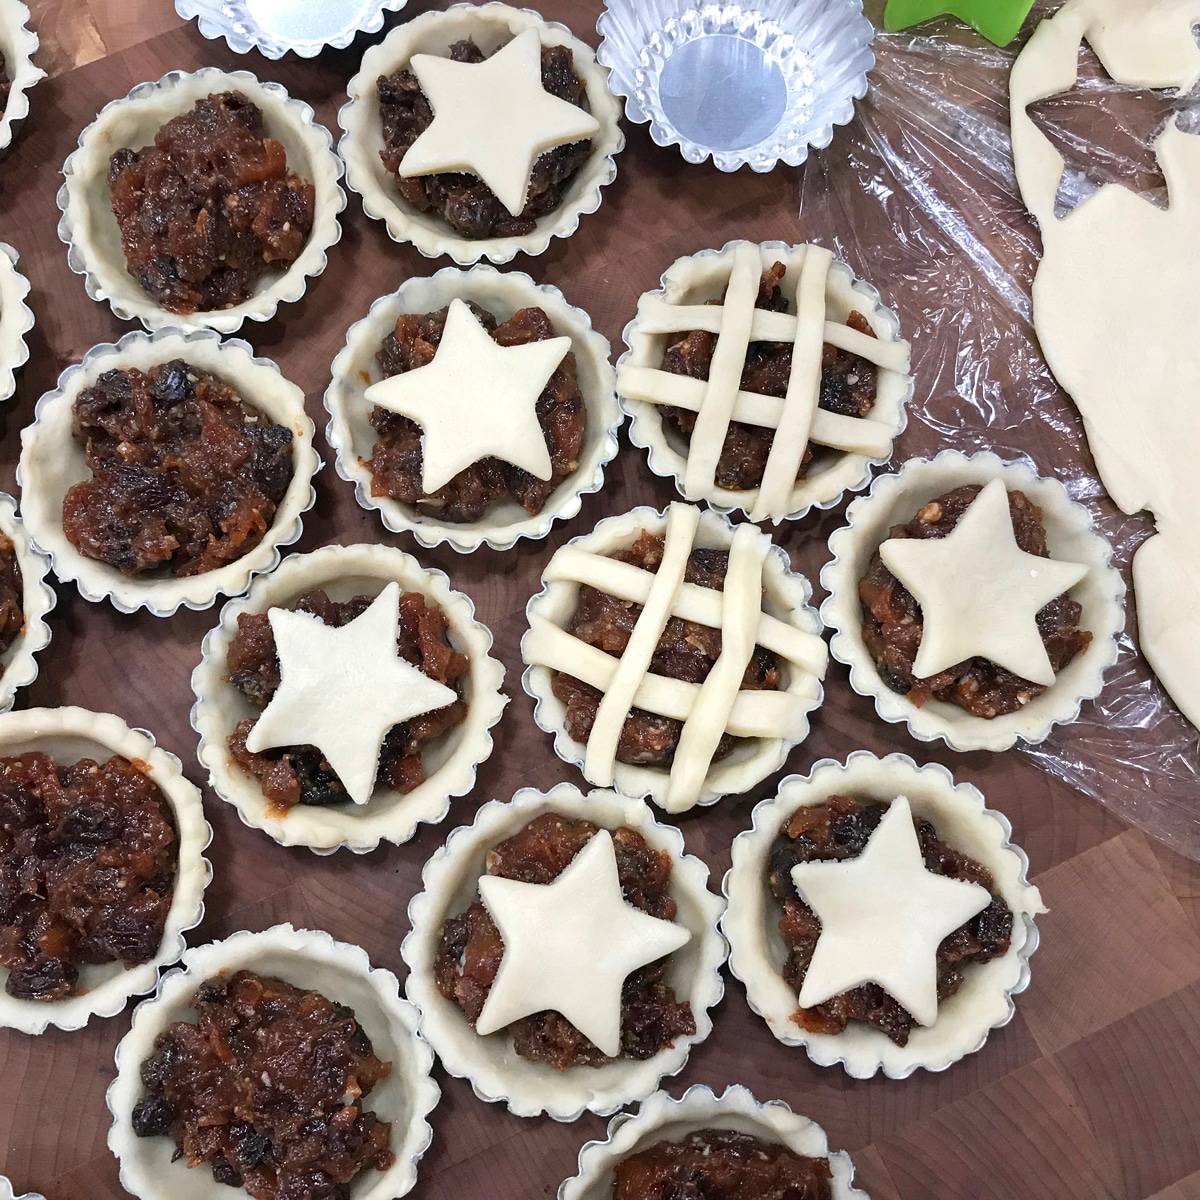 mince pie recipe best mincemeat pies traditional authentic British English from scratch